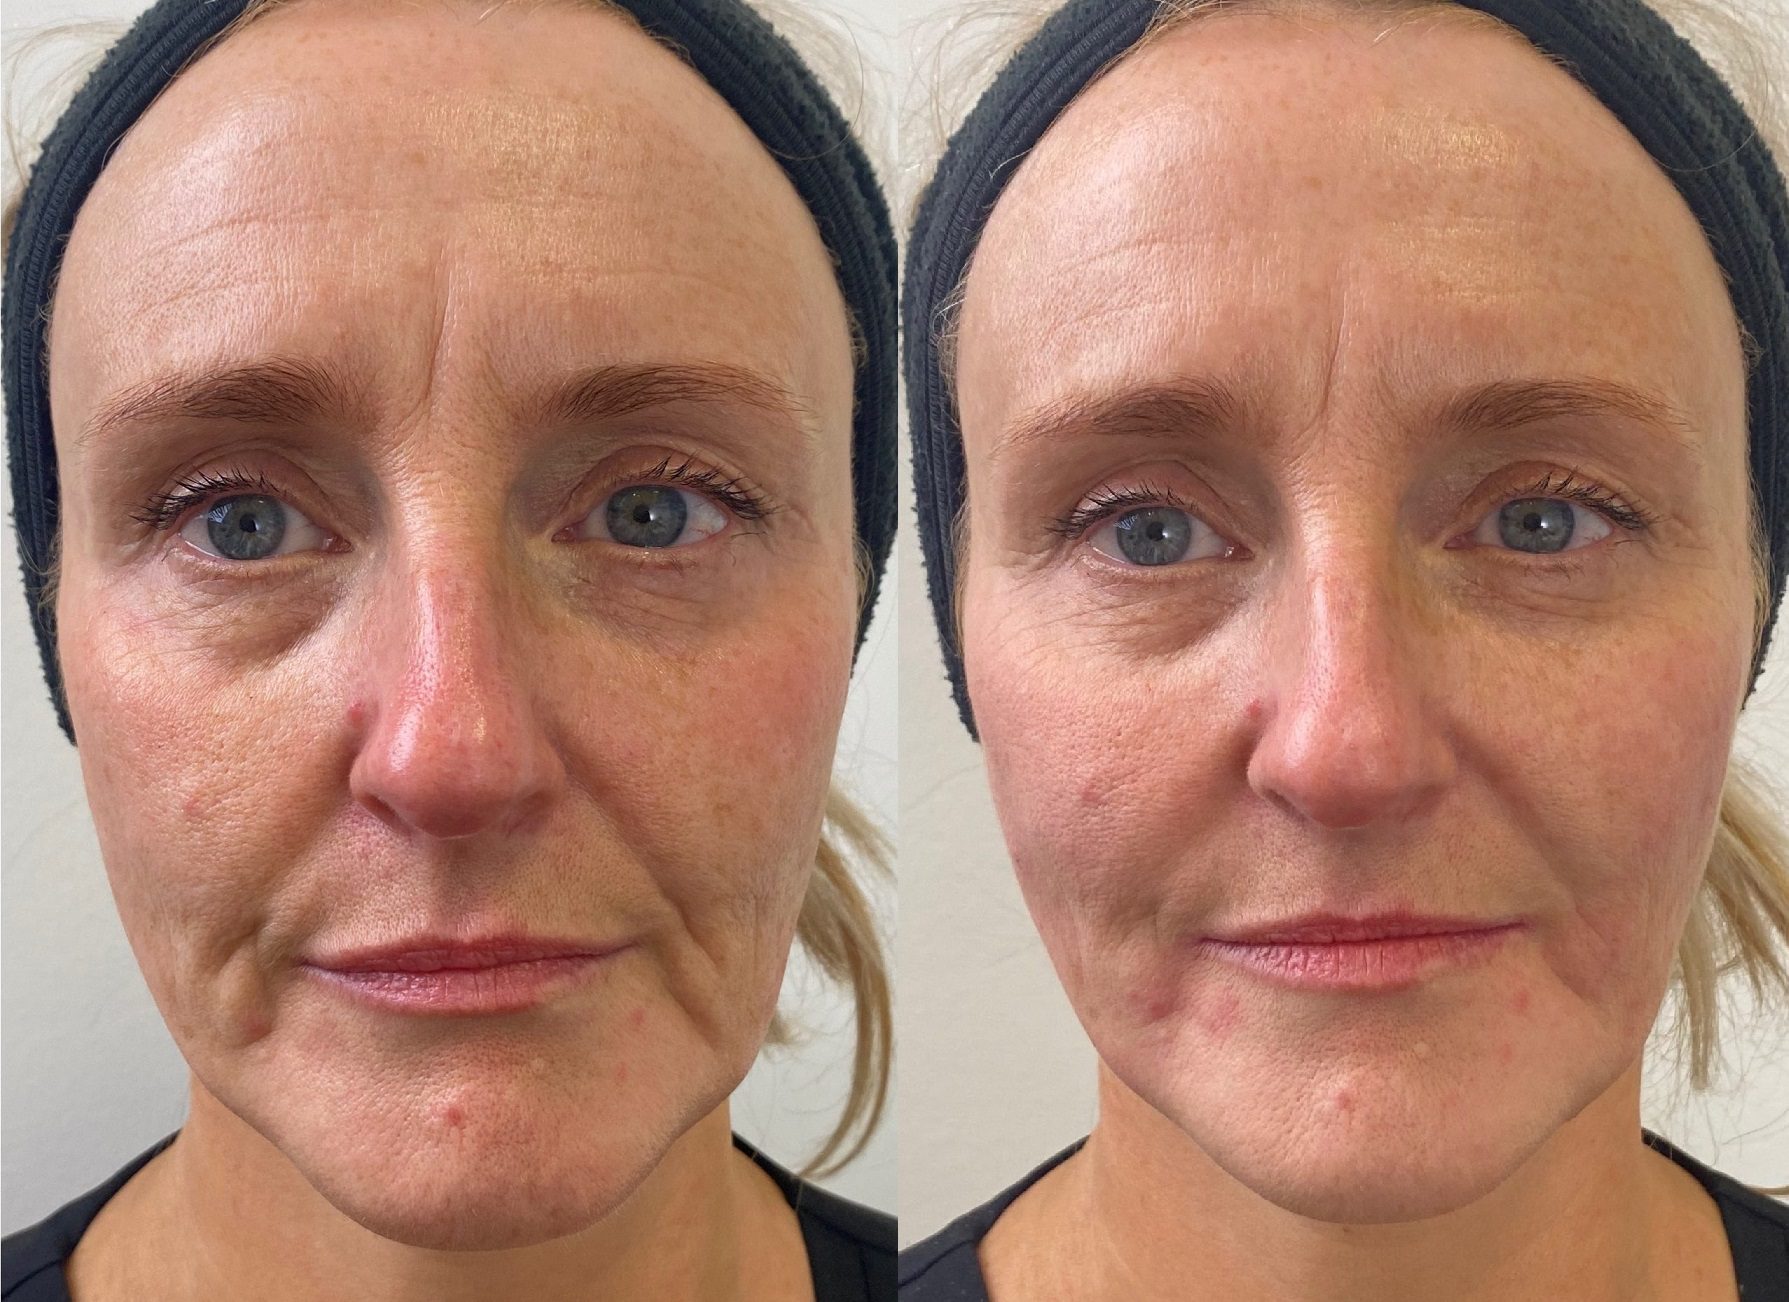 teoxane Lower-Face-Lift-Dermal-Fillers-Before-and-After-by-Dr-Johanna-Ward